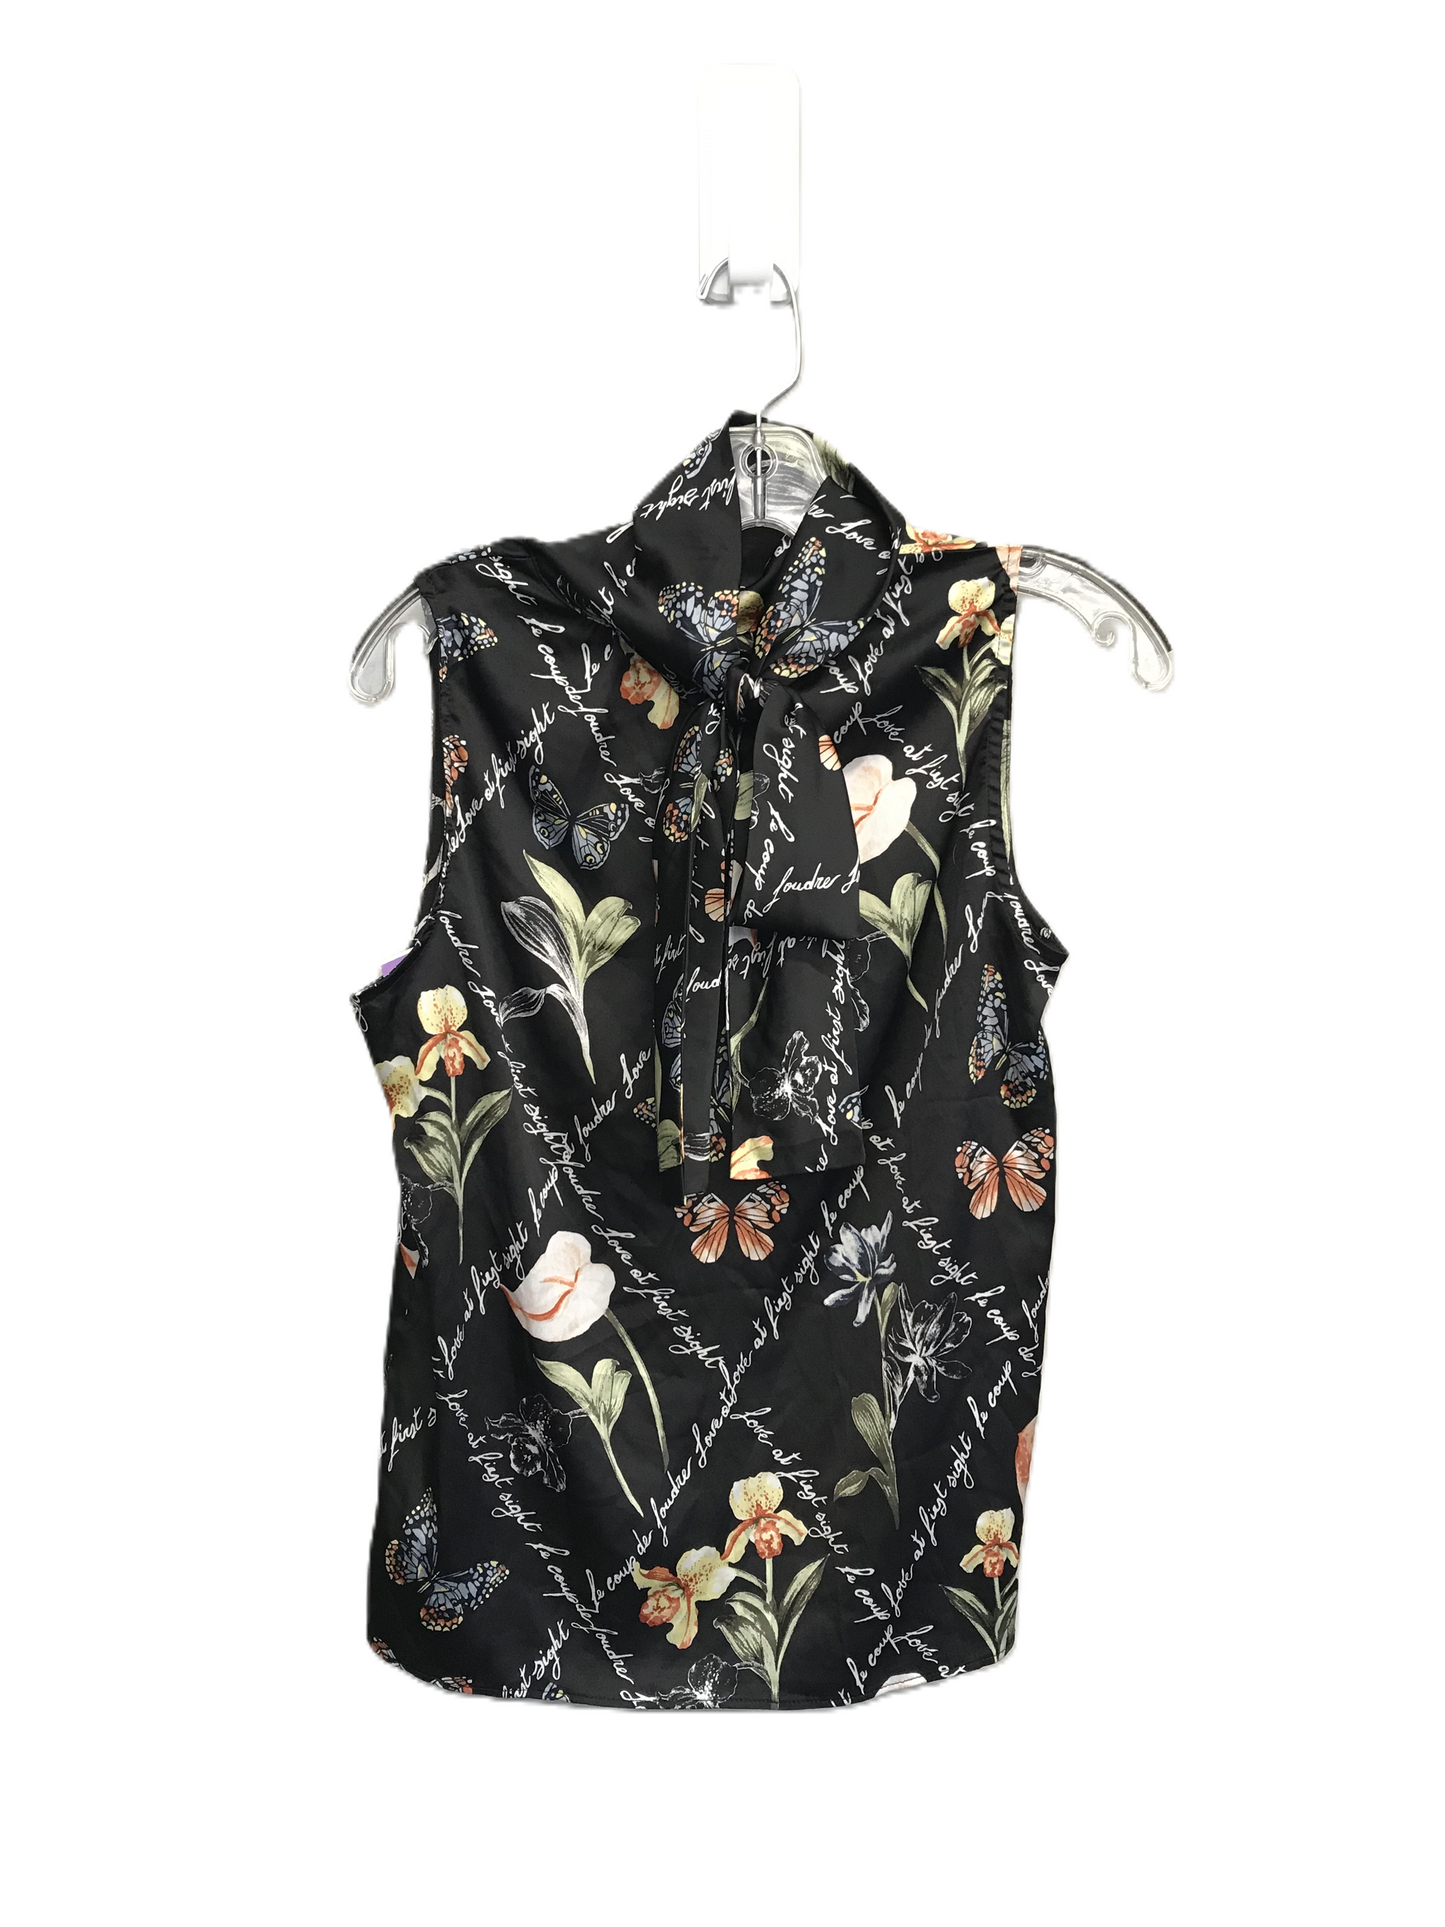 Floral Print Top Sleeveless By White House Black Market, Size: Xs